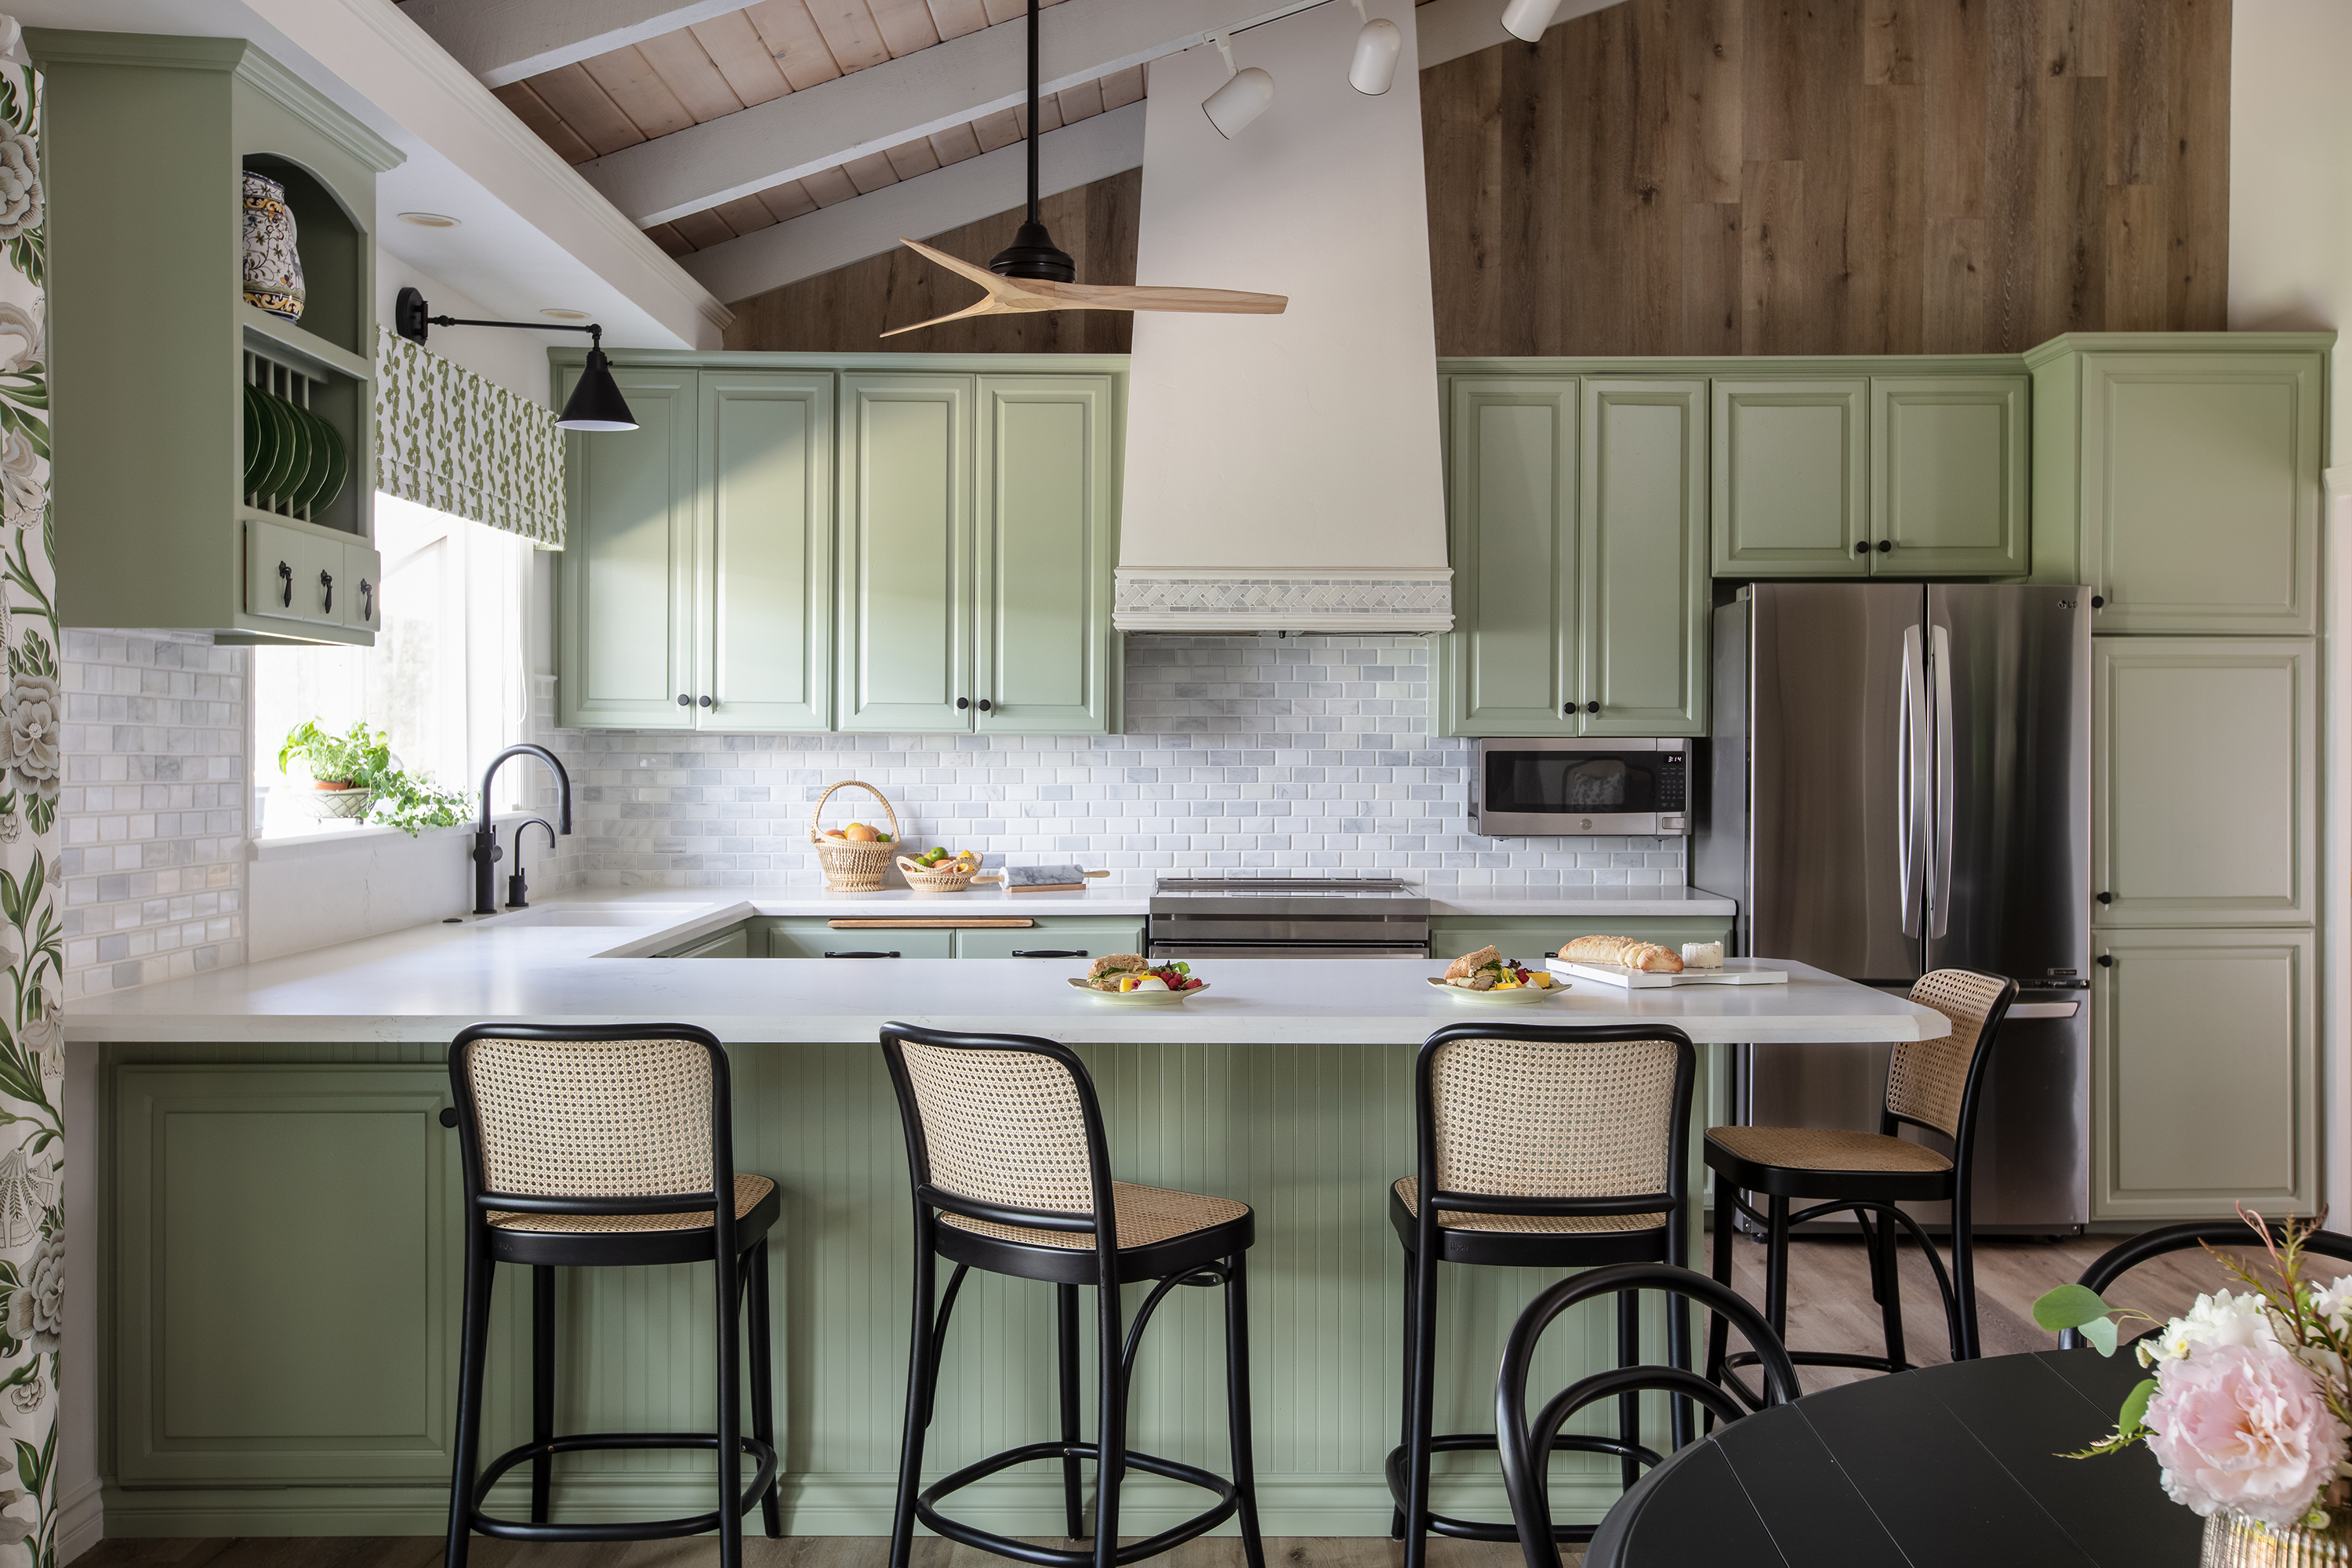 Kitchen with bar stools, green cabinets, and ceiling fan